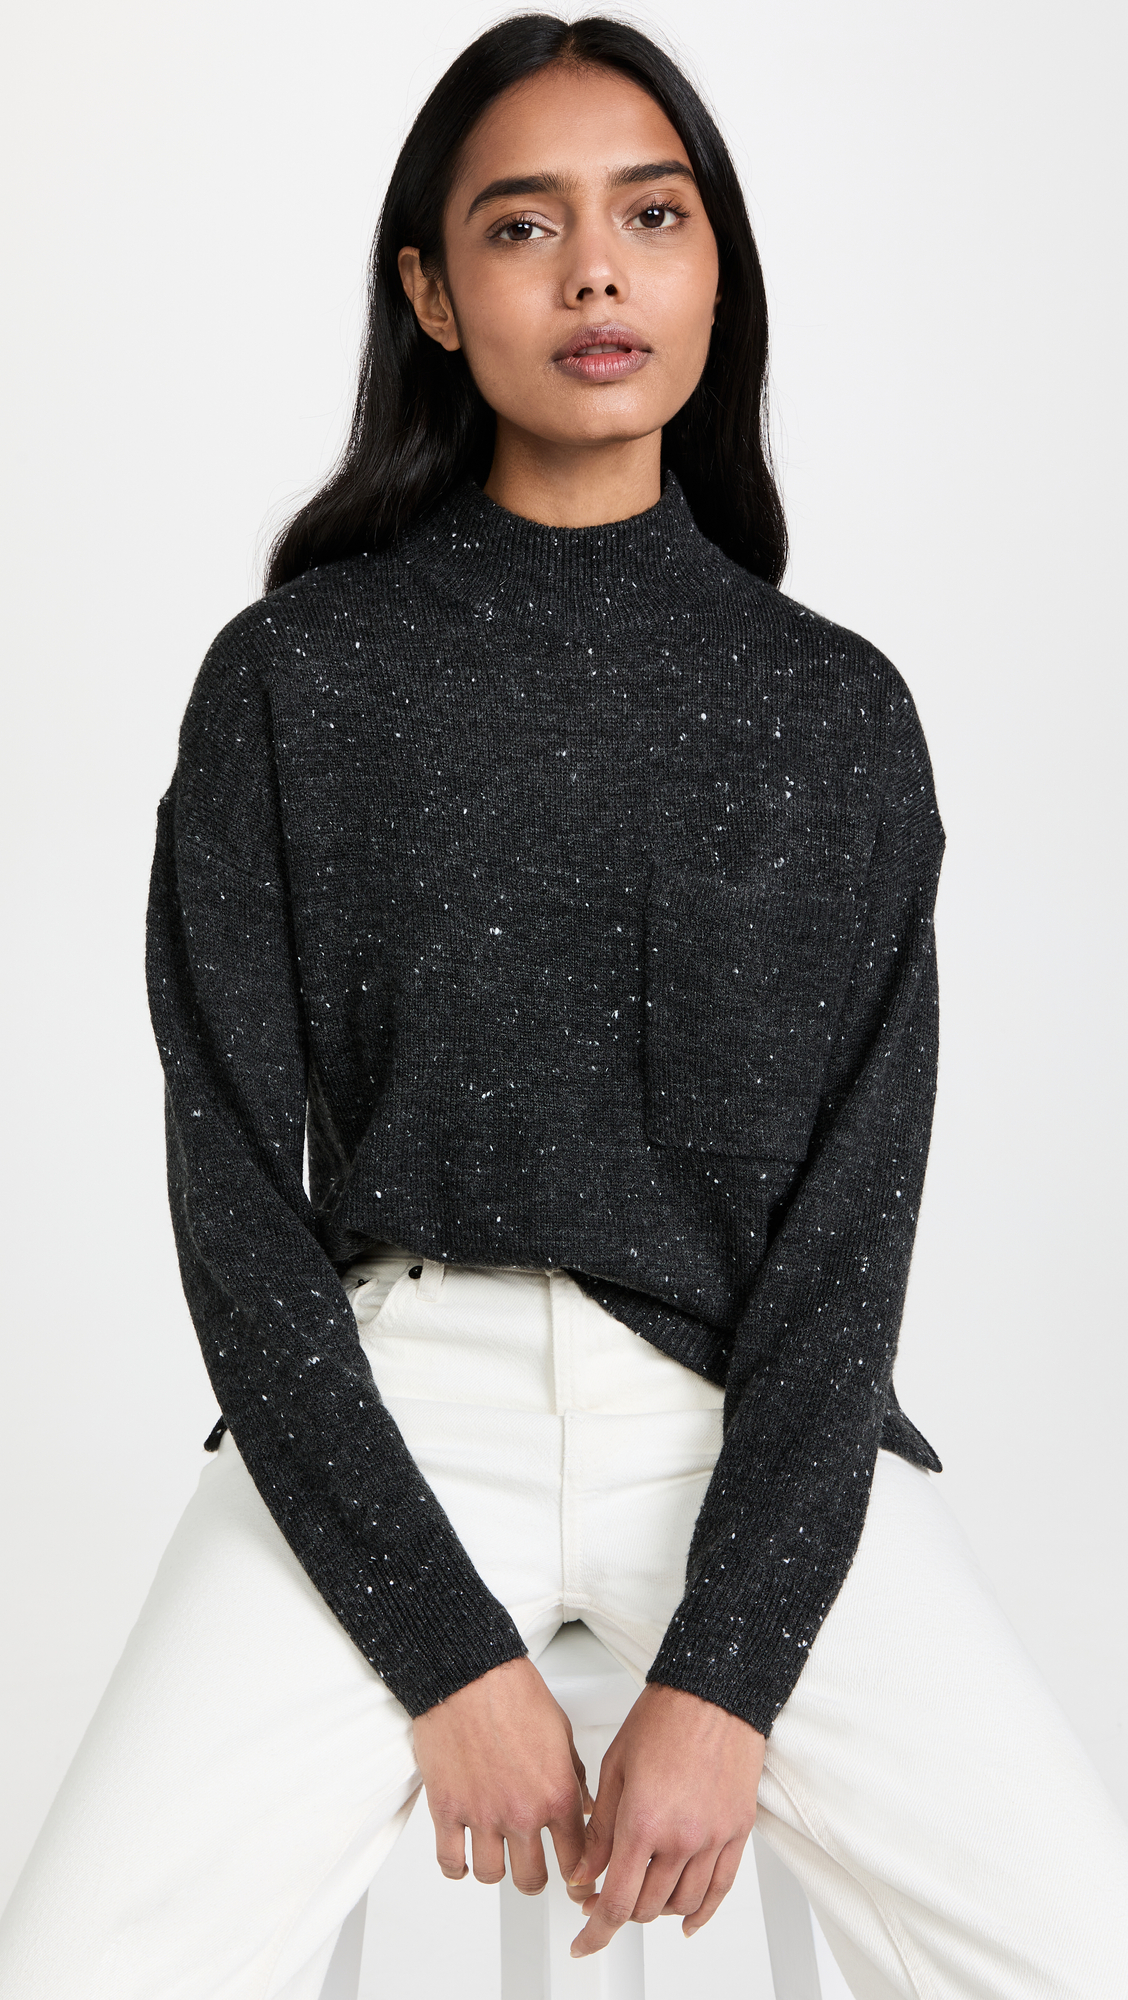 The 30 Best Mock-Neck Sweaters for Women | Who What Wear